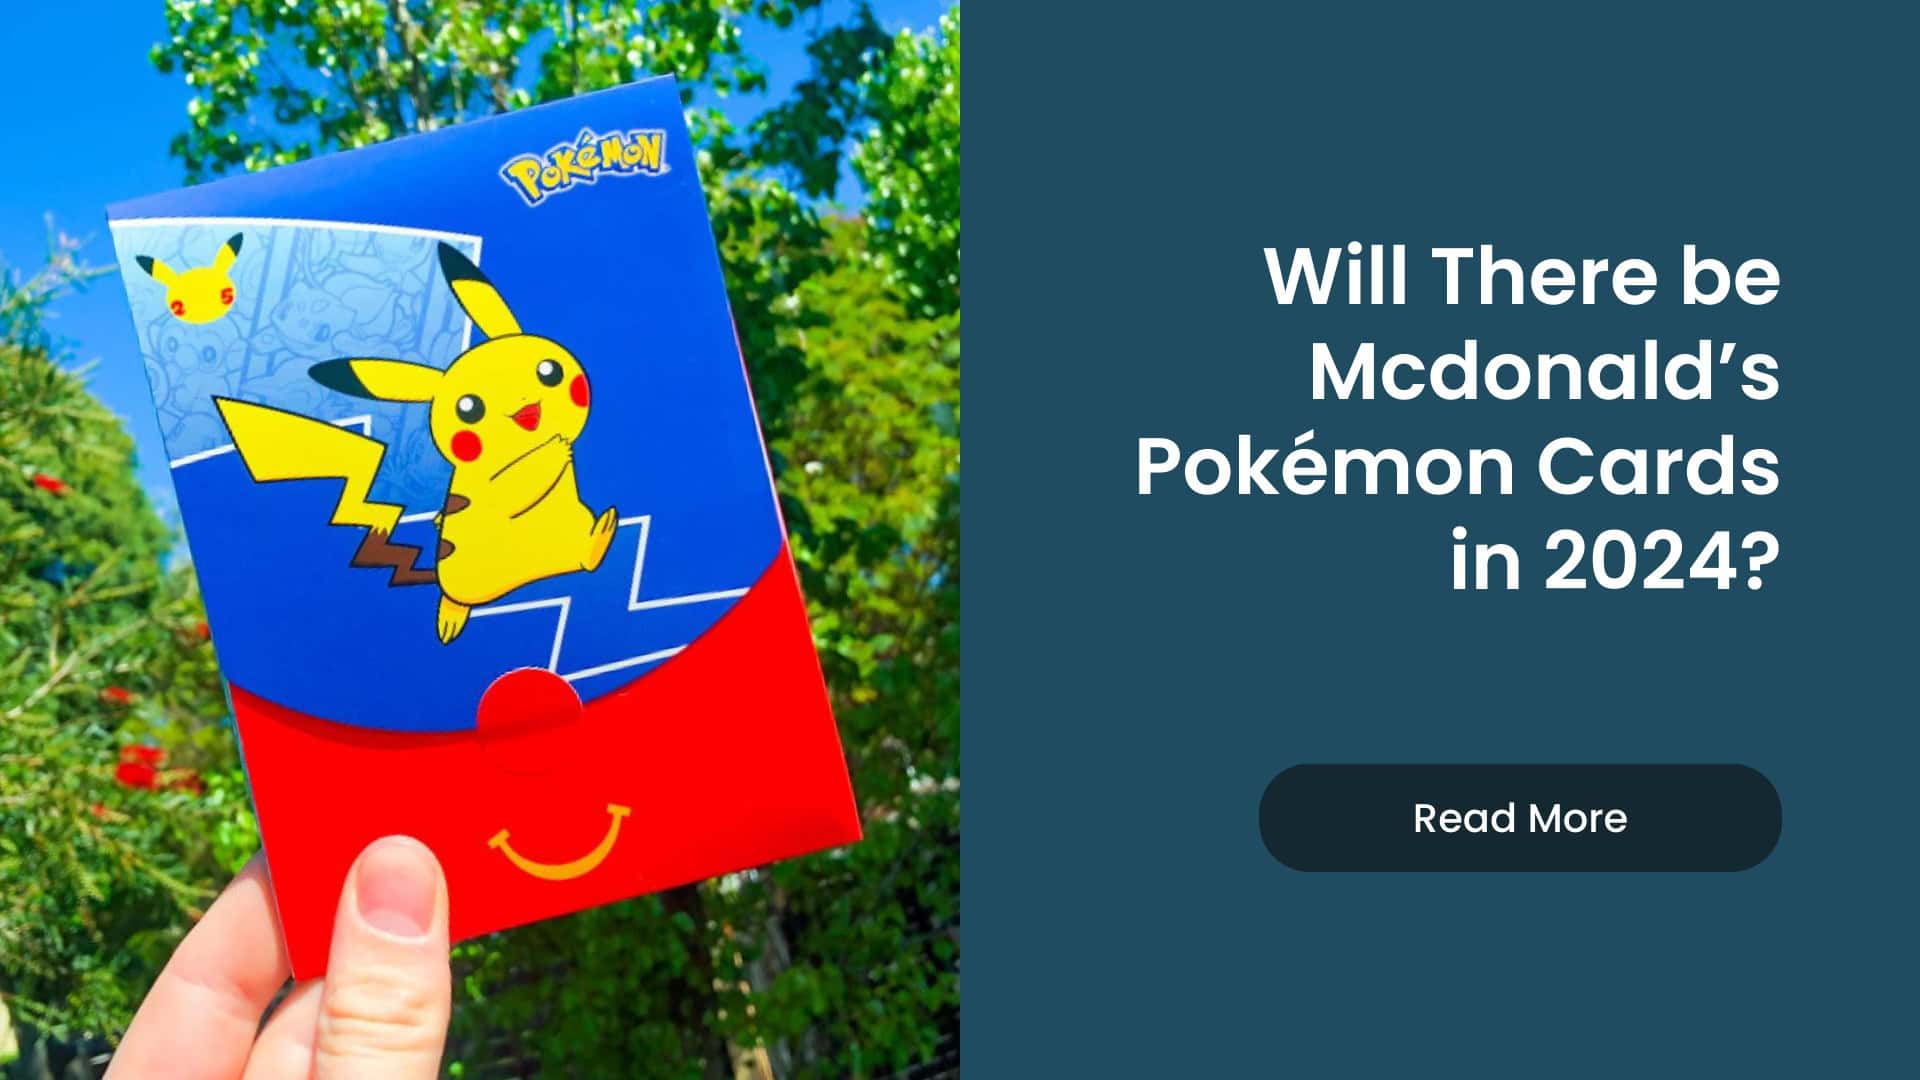 Will There be Mcdonald’s Pokémon Cards in 2024 Banner